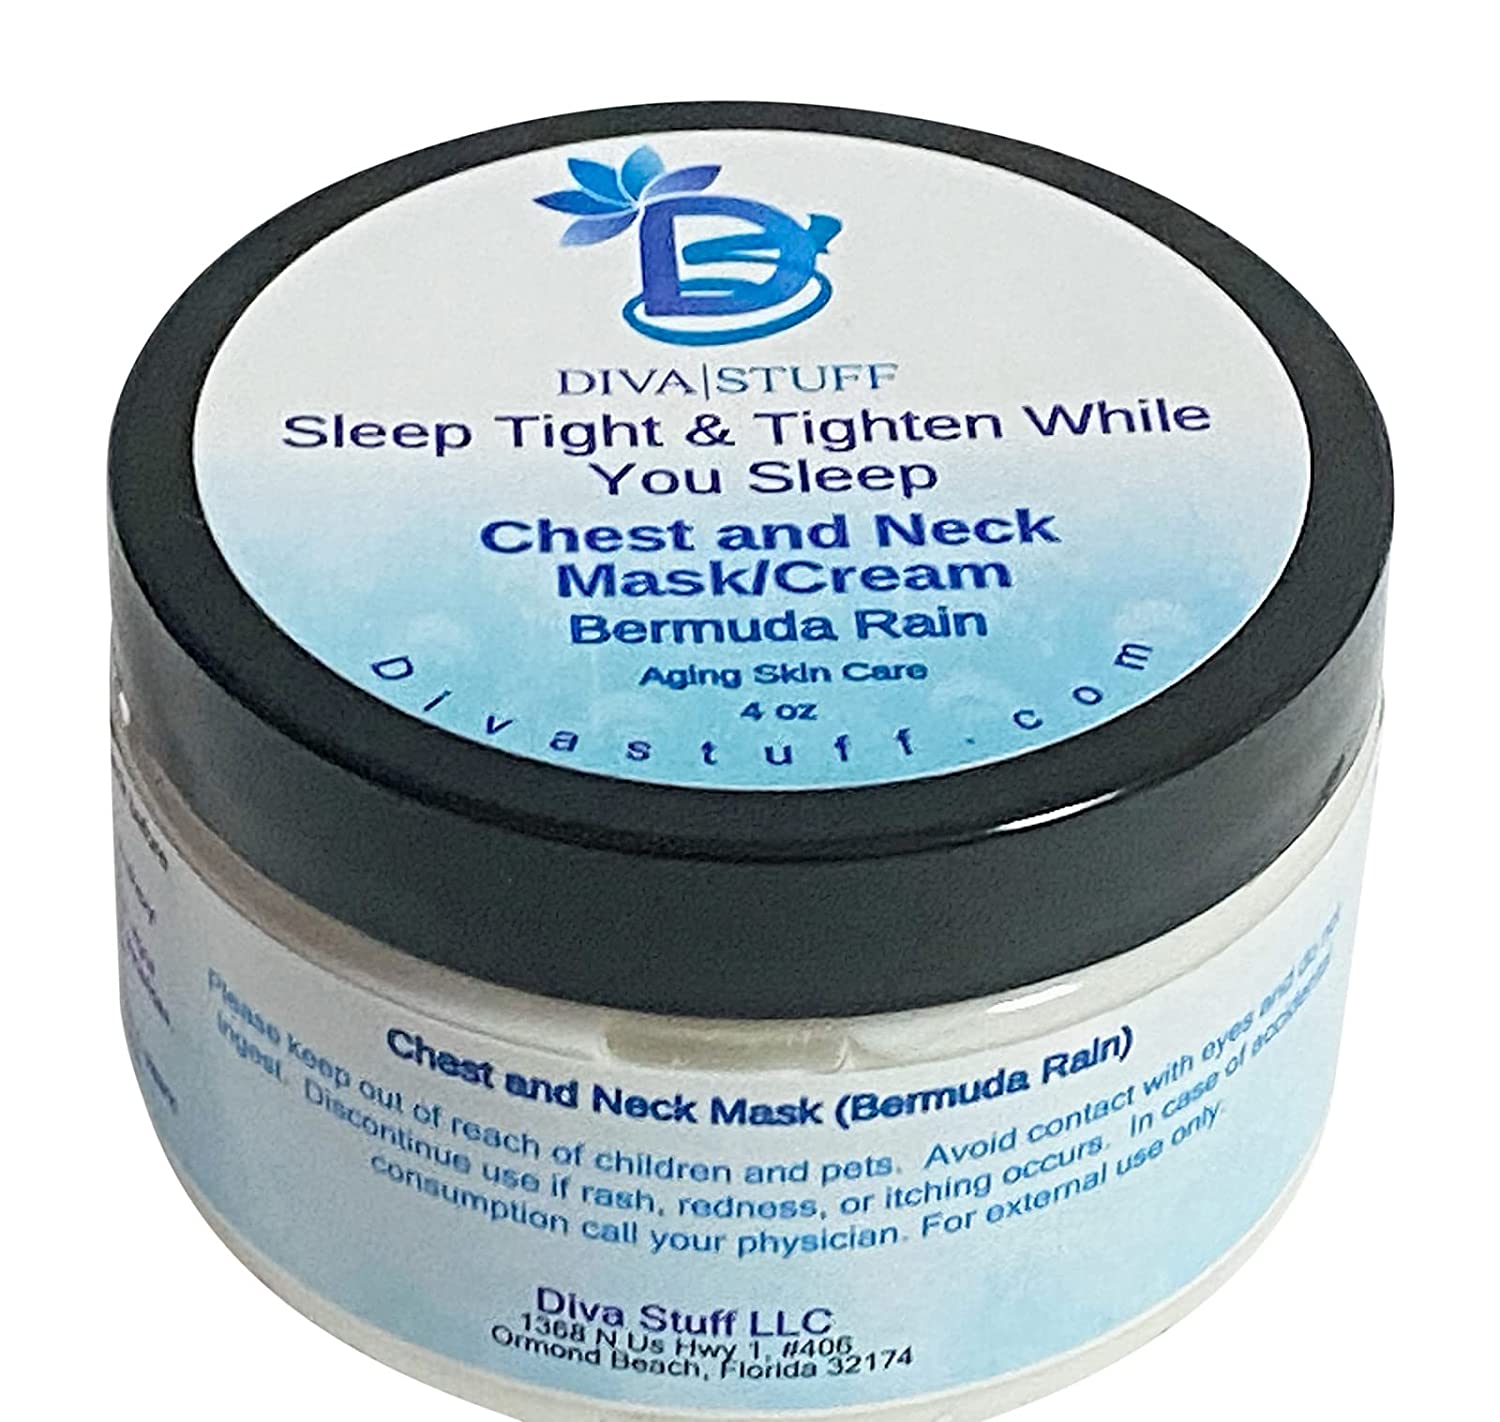 Sleep Tight and Tighten While You Sleep Chest and Neck Mask/Cream, With Hibiscus, Hyaluronic Acid,Firming Peptides, Black Goji Butter, Cranberry Enzymes and More, Bermuda Rain Scent, 4 oz By Diva Stuff